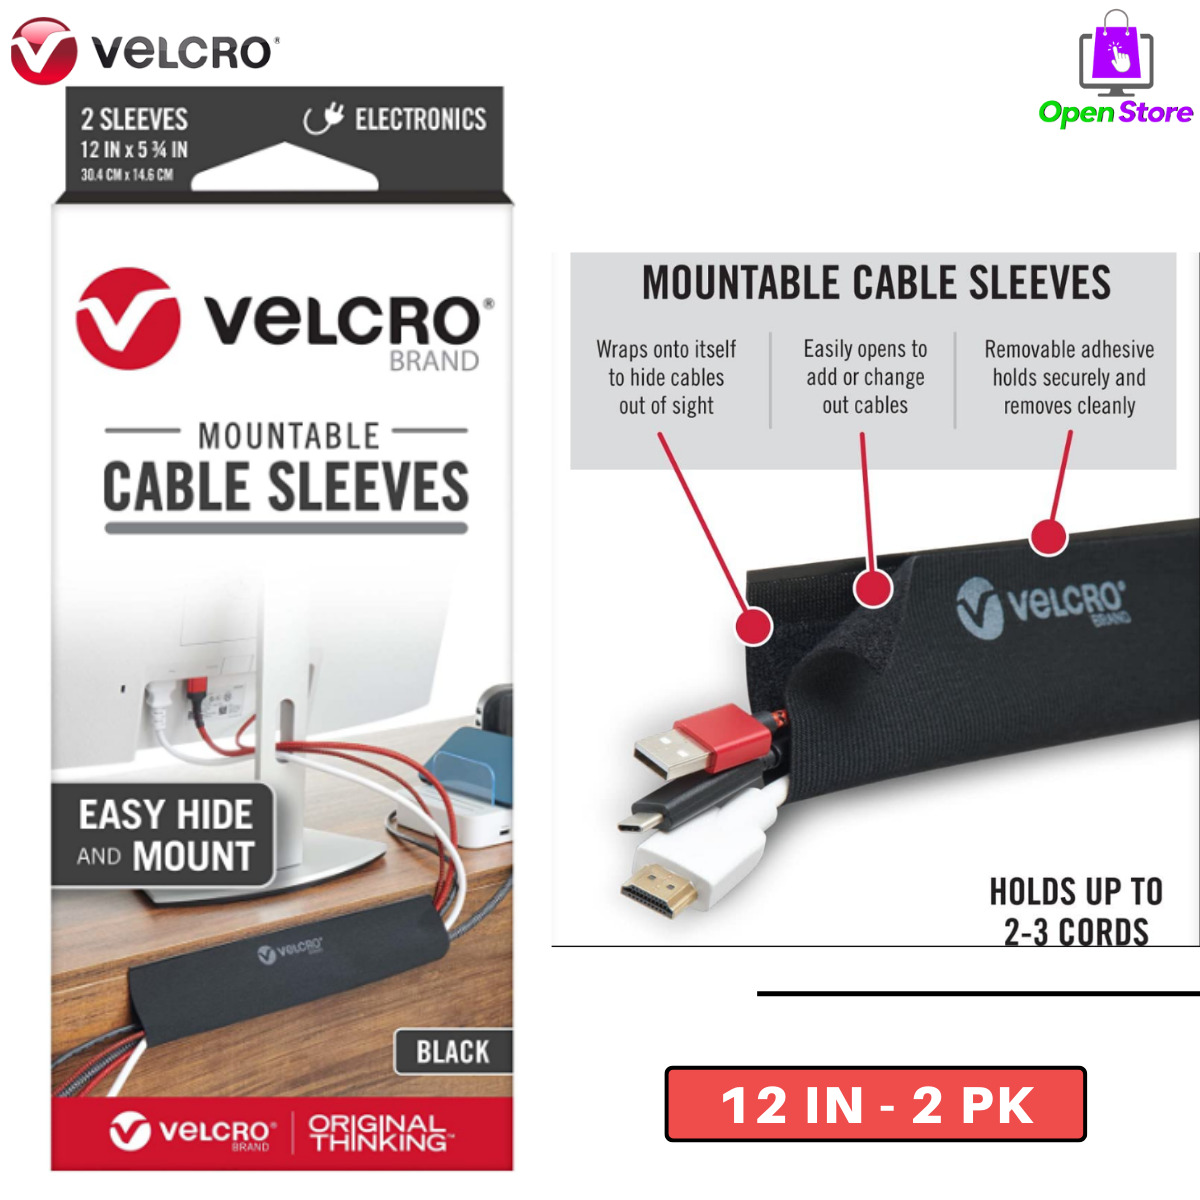 Black Velcro Brand Removable Mountable Cable Sleeves 12 In 2 Pk For Walls & Desk